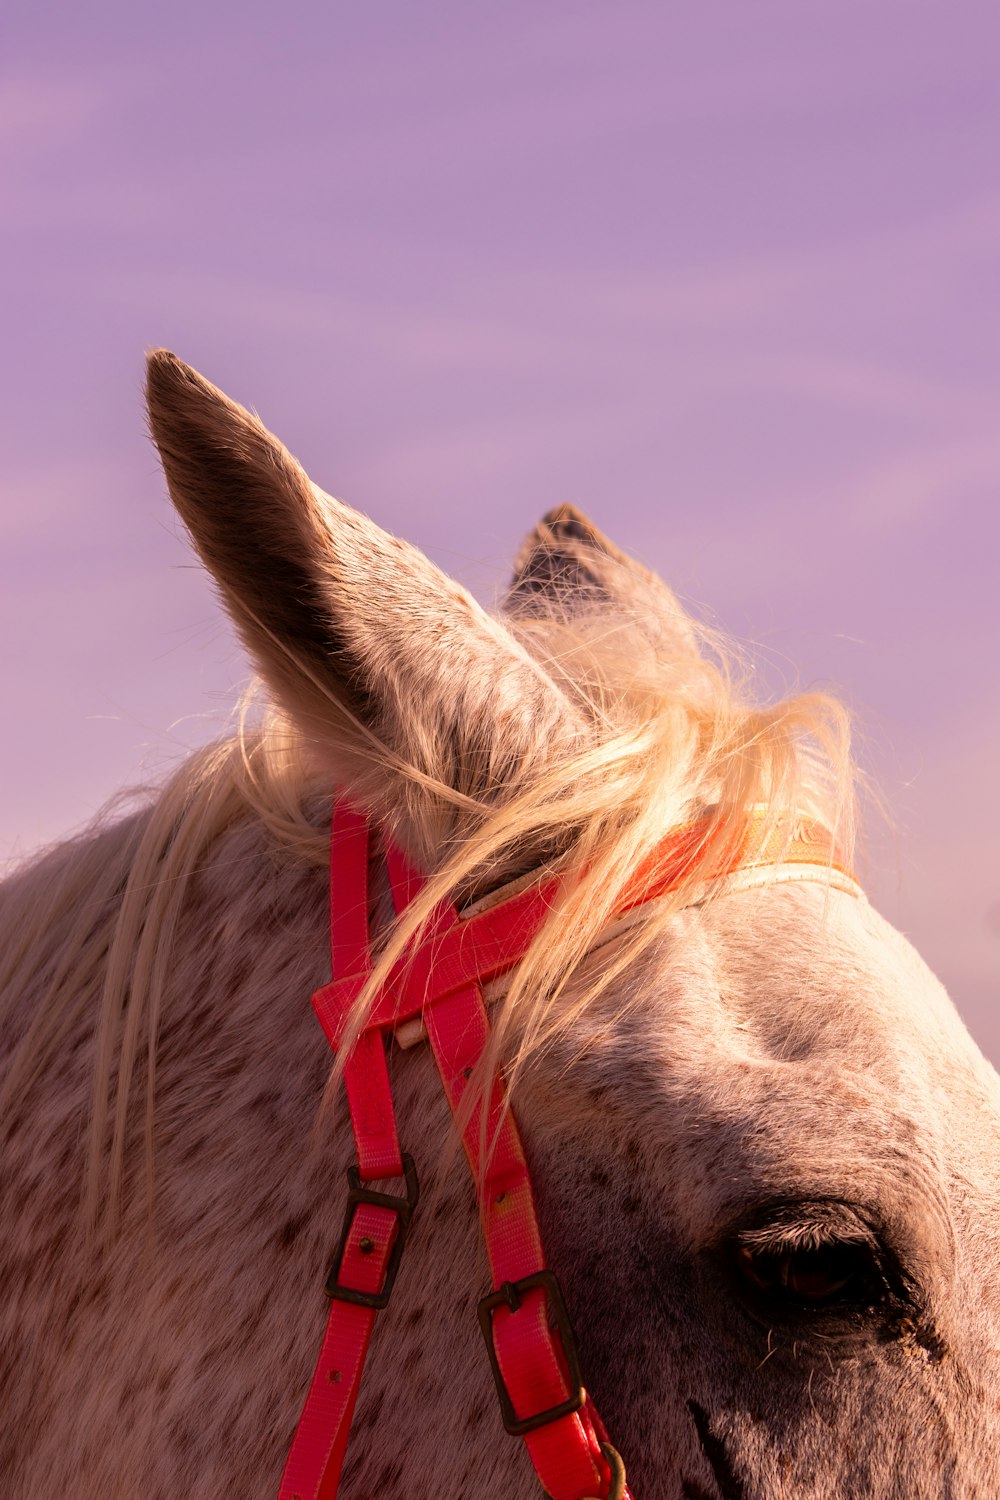 a close up of a horse wearing a red harness